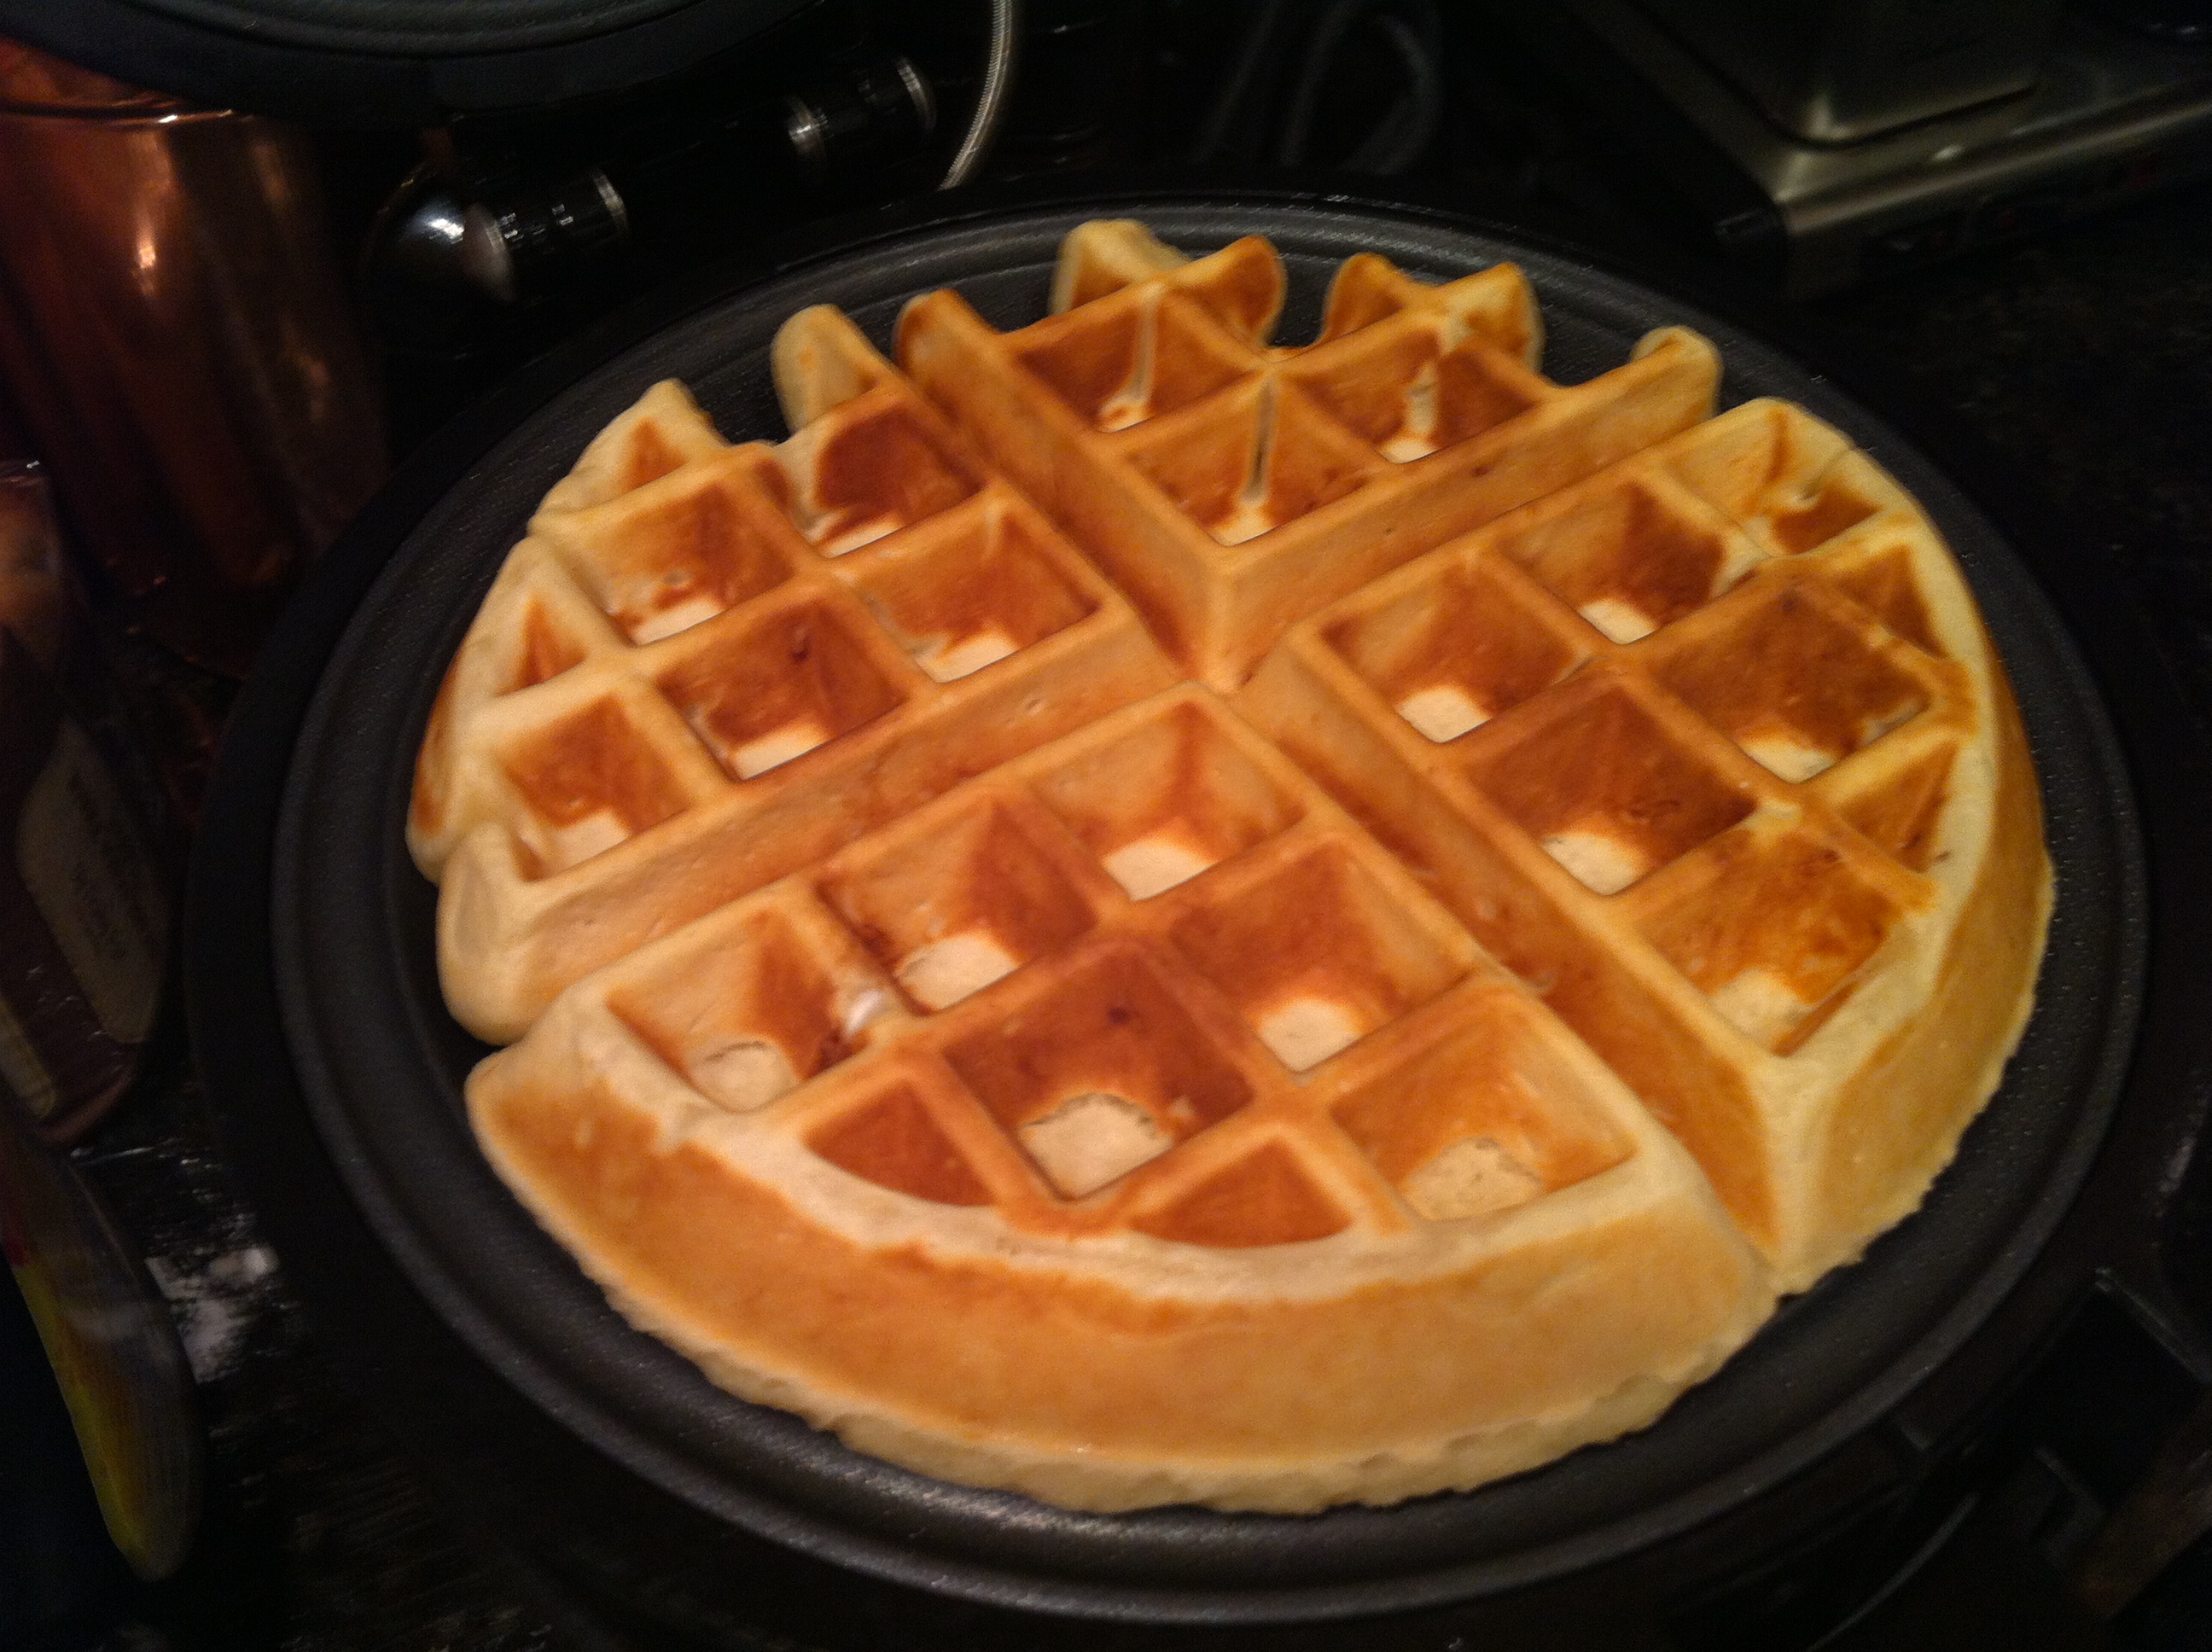 Hot, piping Belgian waffles coming out of the waffle maker